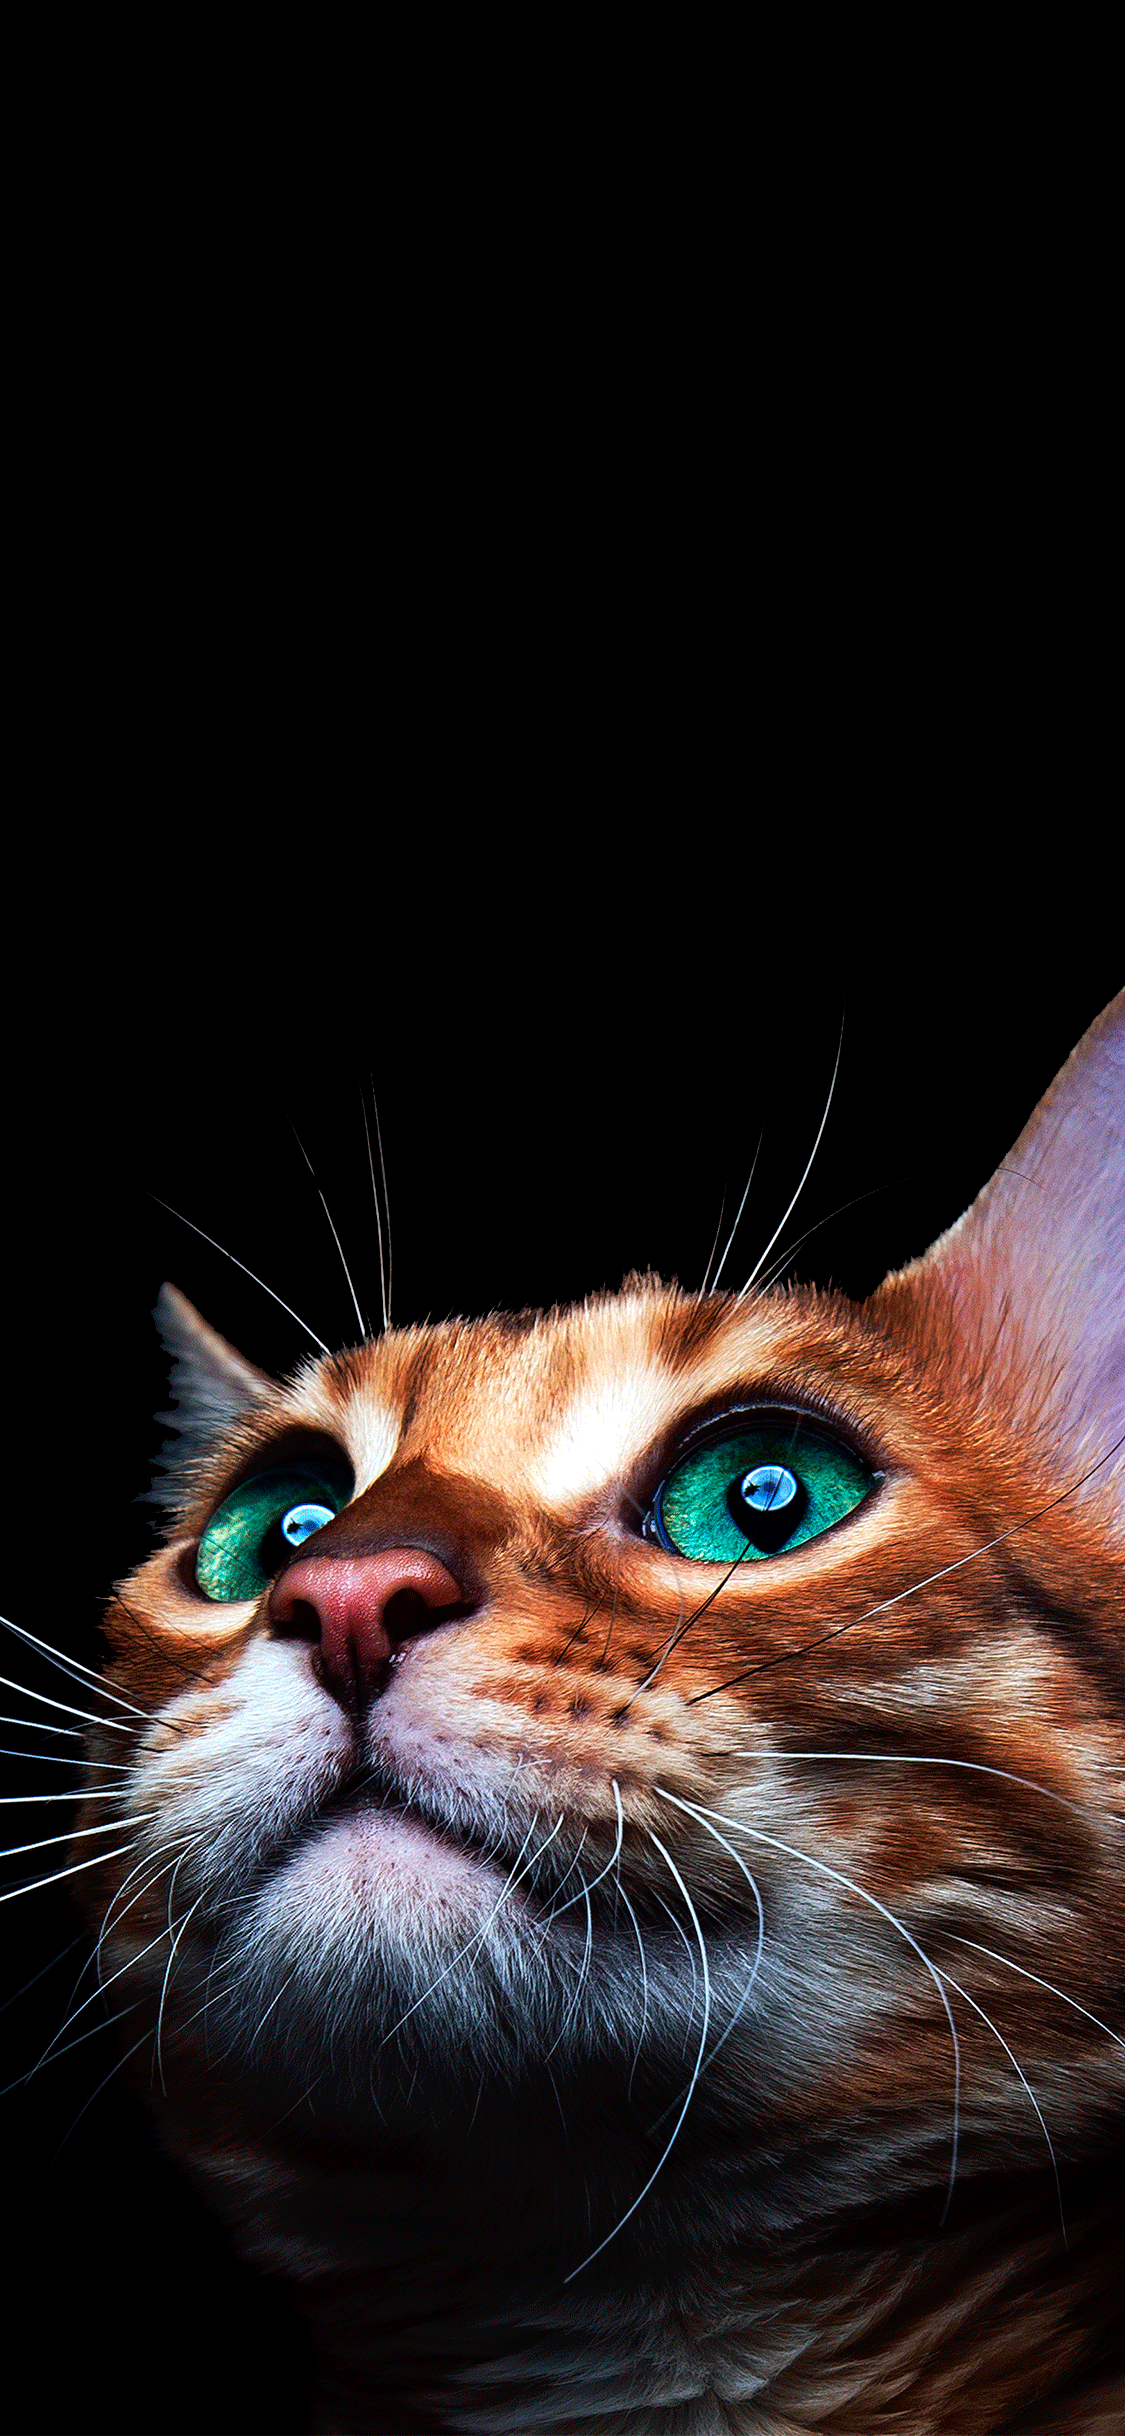 Cat Face Iphone Wallpapers